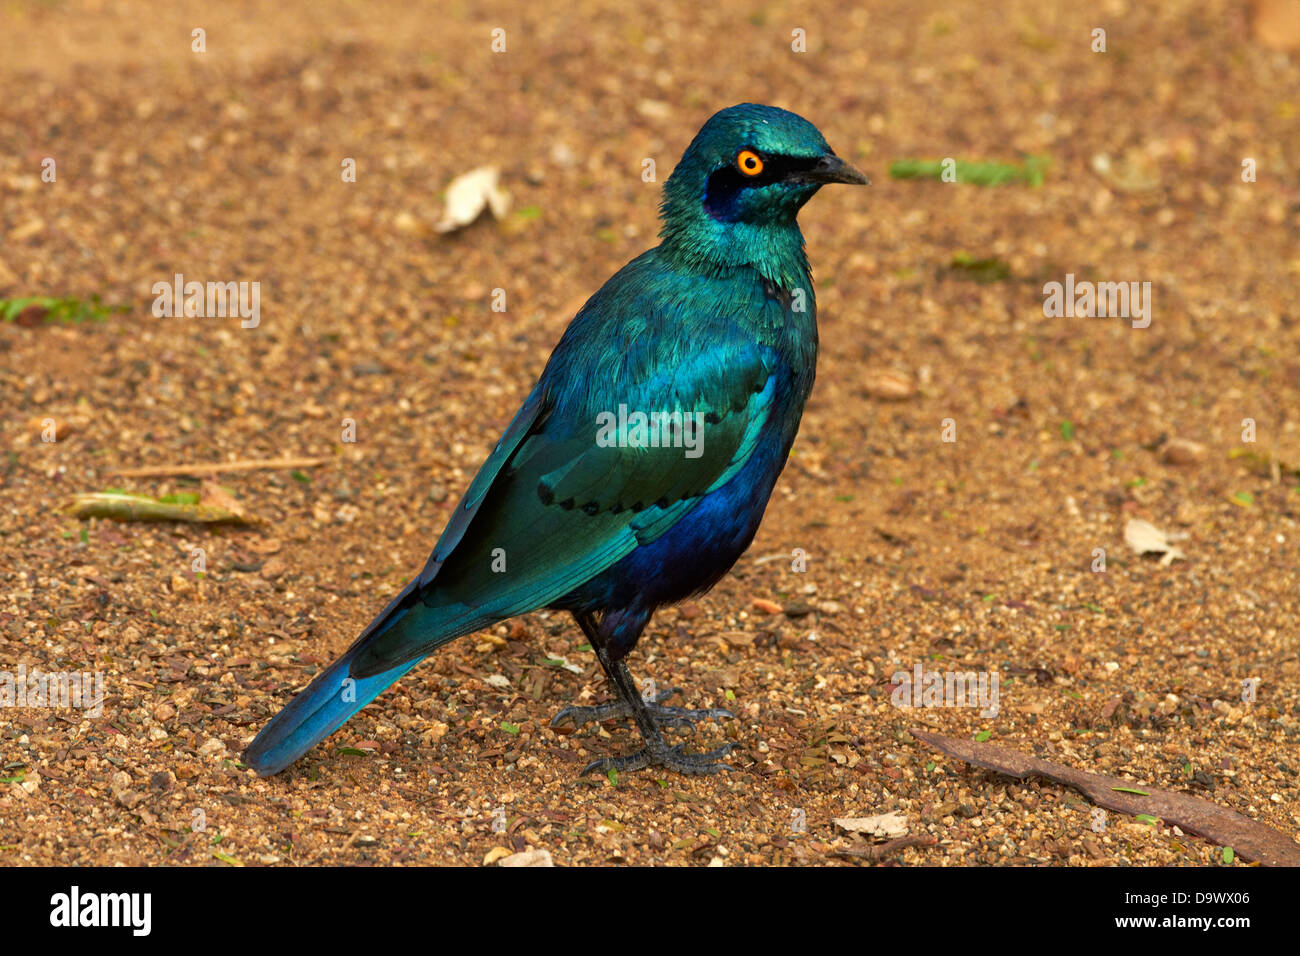 Greater Blue-eared Starling or Greater Blue-eared Glossy-starling (Lamprotornis chalybaeus), Kruger National Park, South Africa Stock Photo